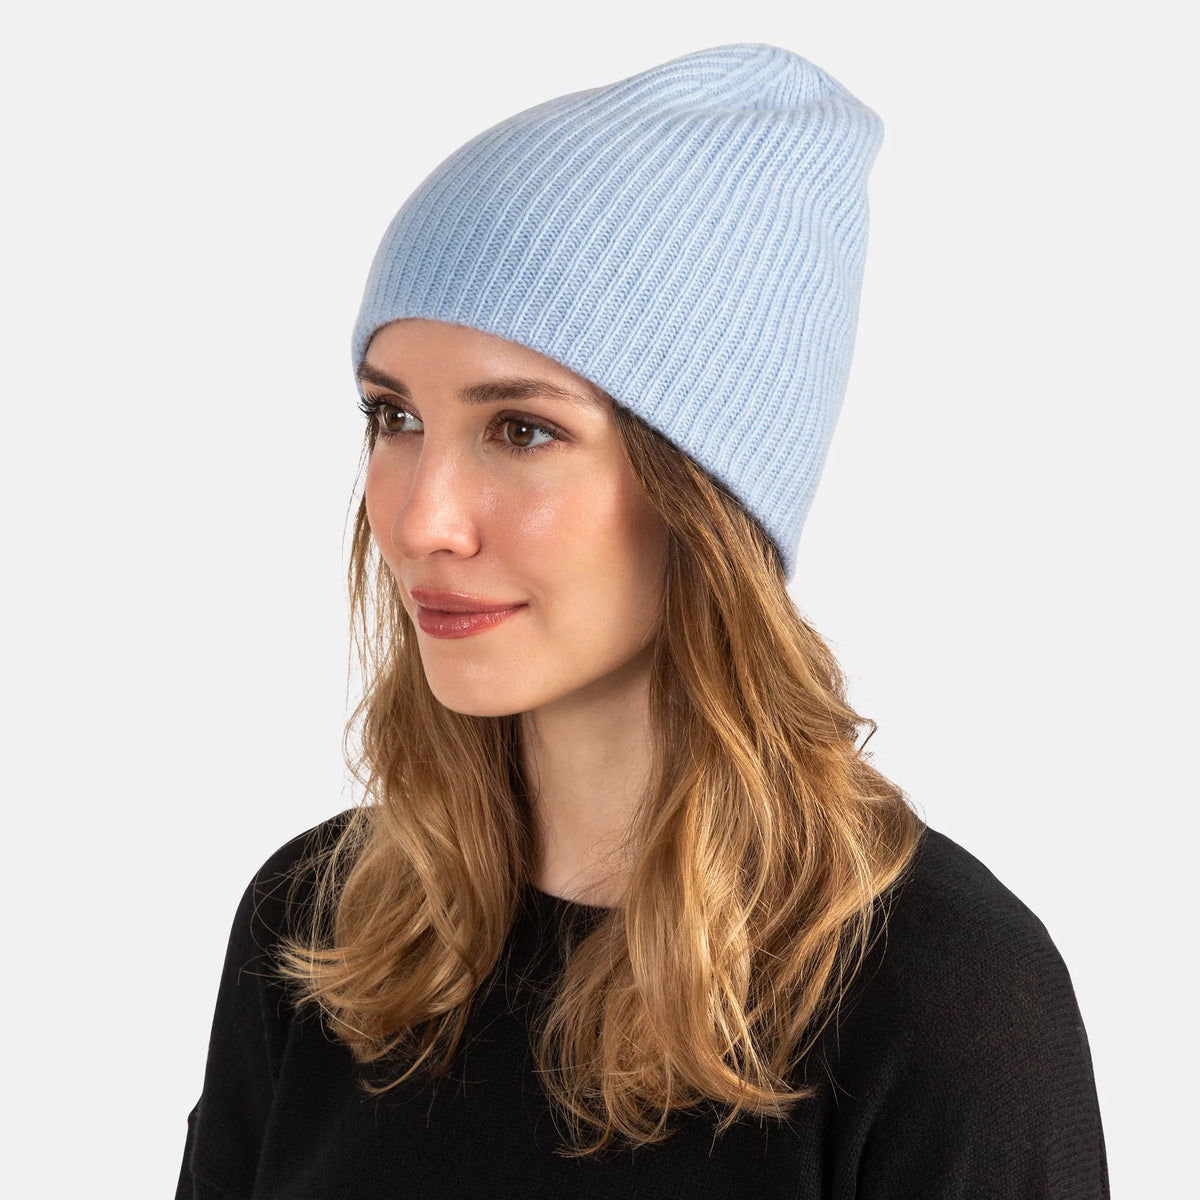 Picture of a woman wearing a double layer rib knit hat in orange.